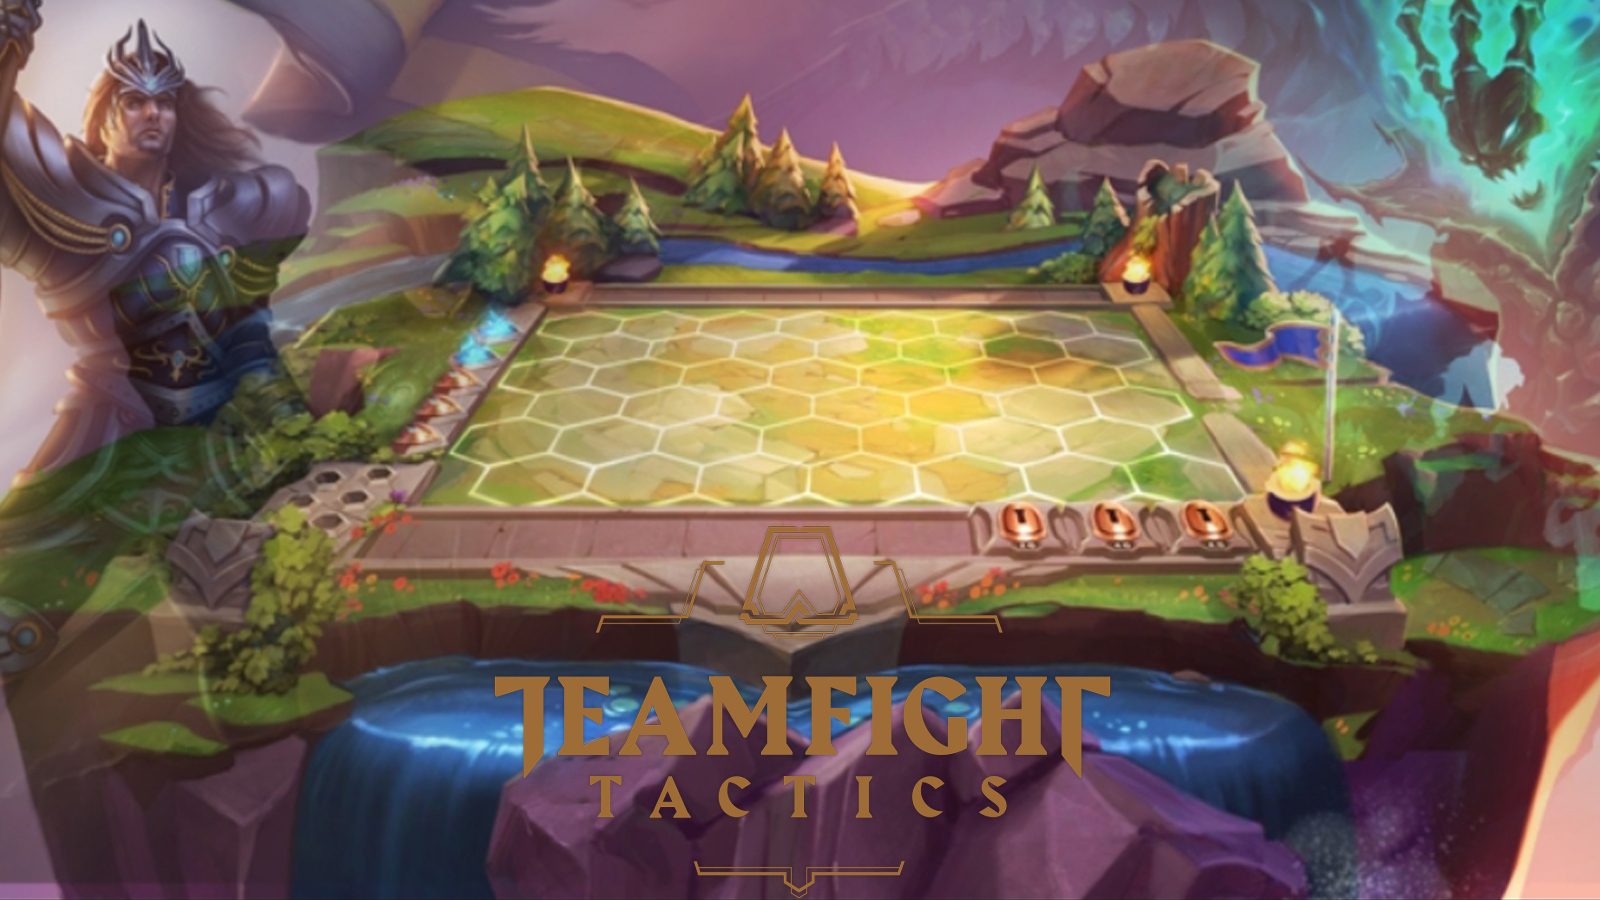 How to play Auto Chess - strategy and tips for Teamfight Tactics, Dota  Underlords, and Auto Chess